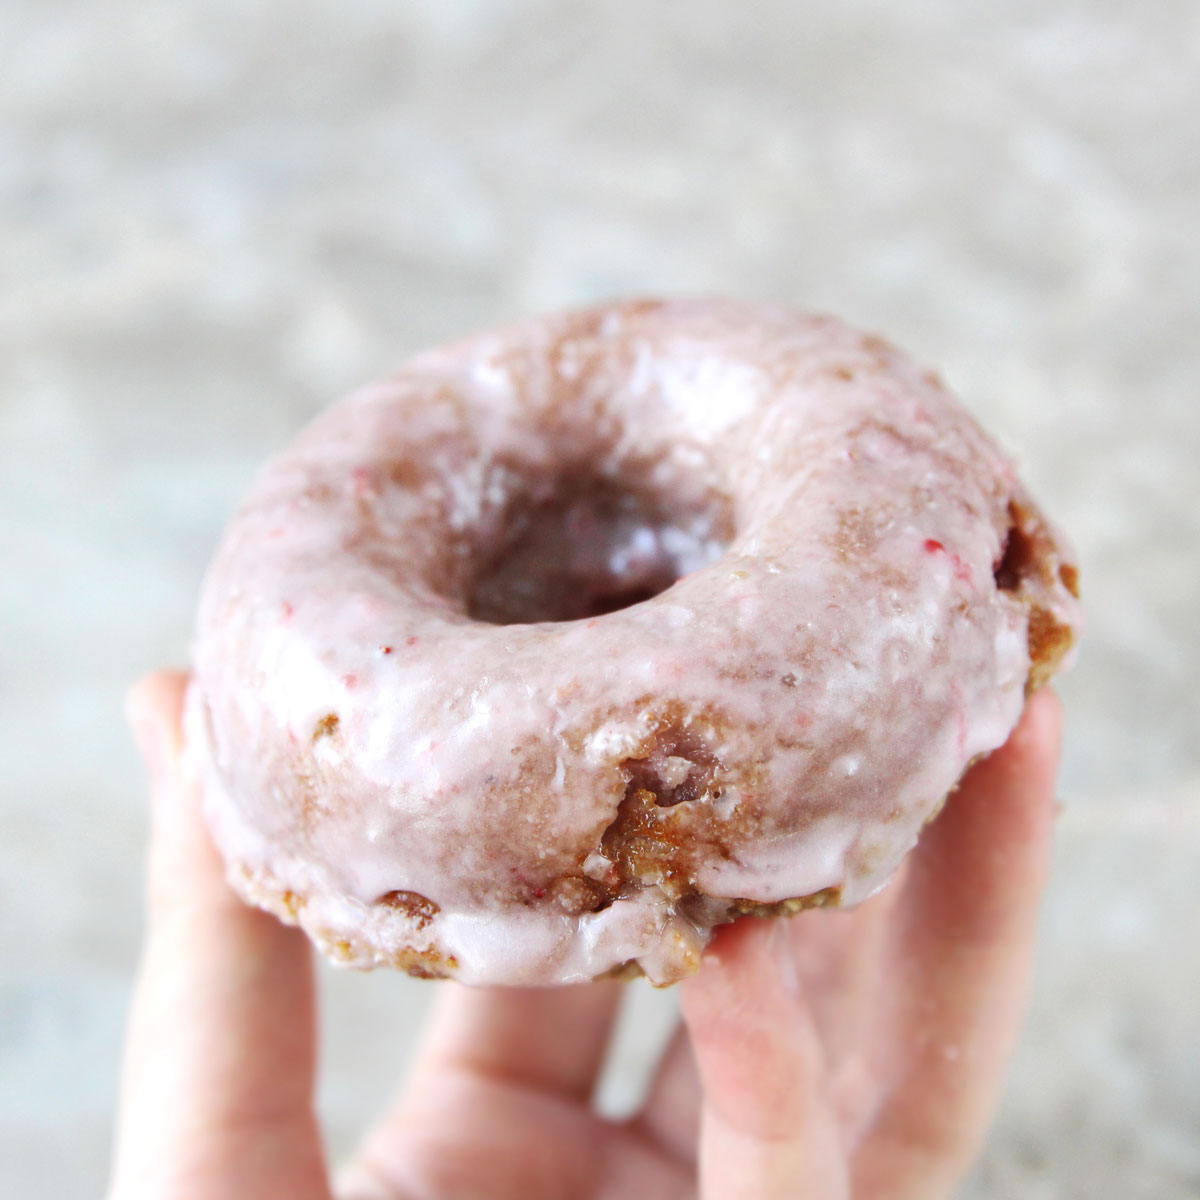 How to Make Paleo Baked Strawberry Donuts (Gluten-Free) - Sweet Potatoes in the Microwave